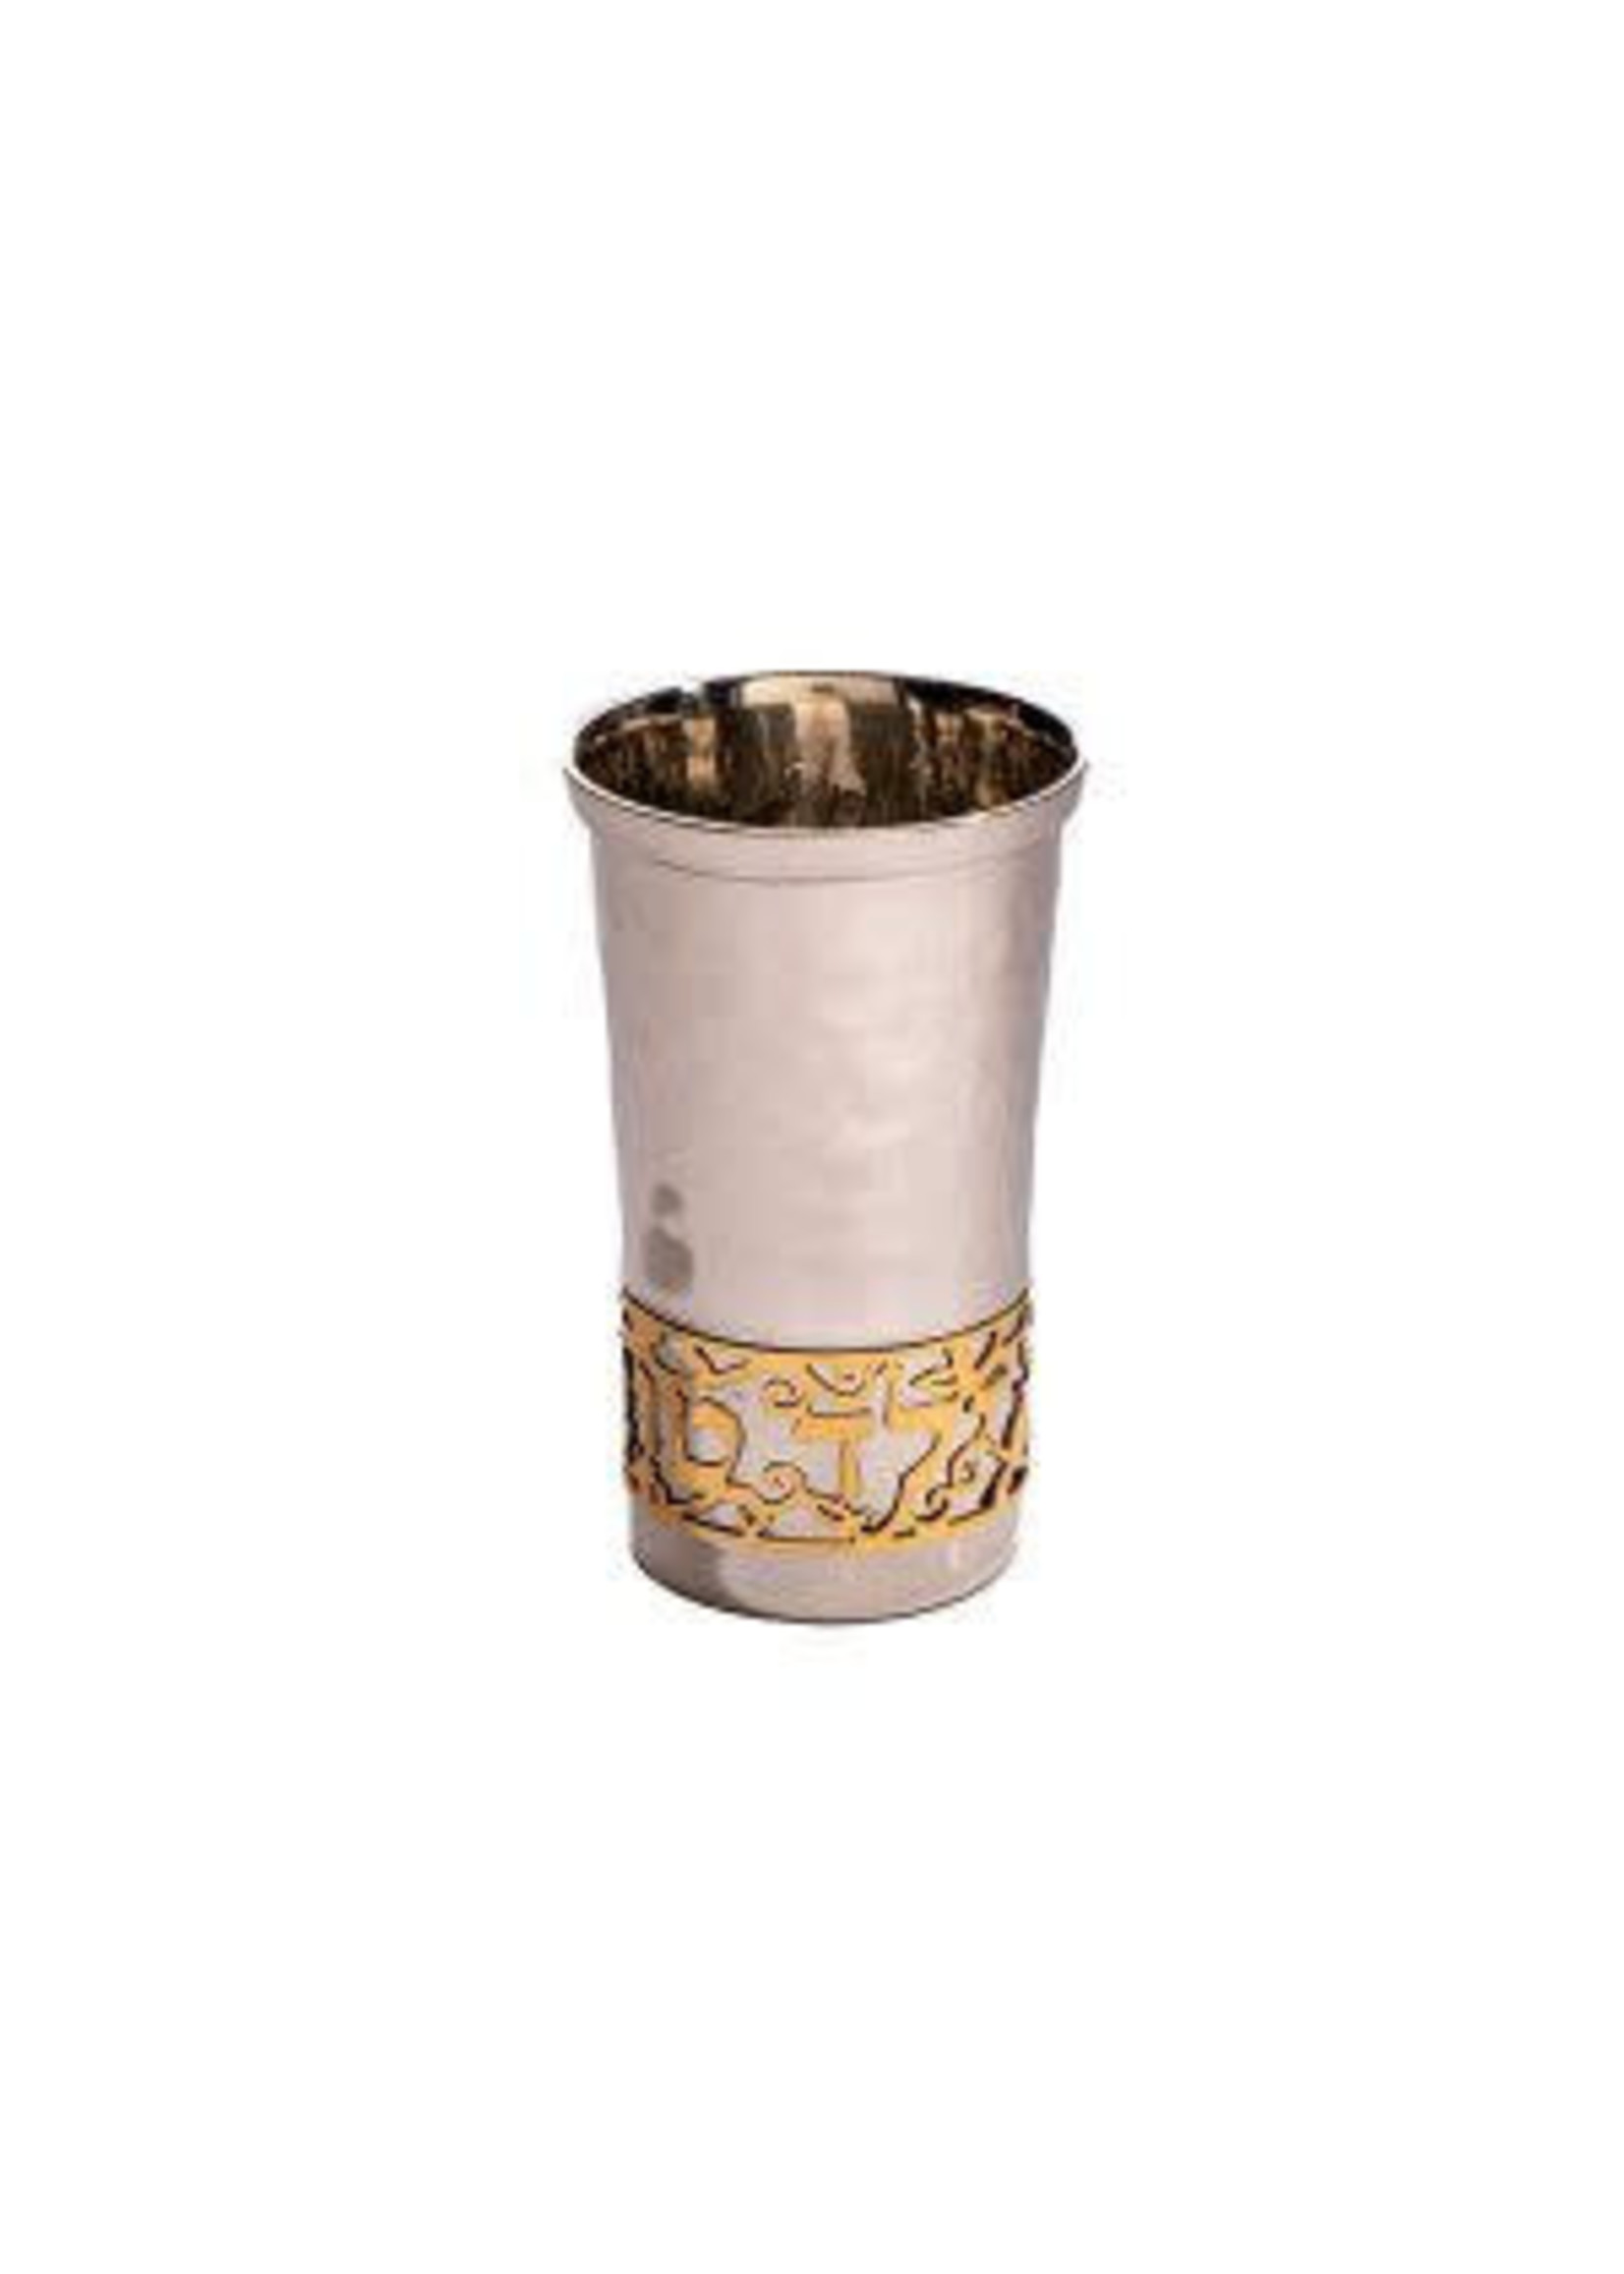 YELED TOV CUP HAMMERED GOLD LACE